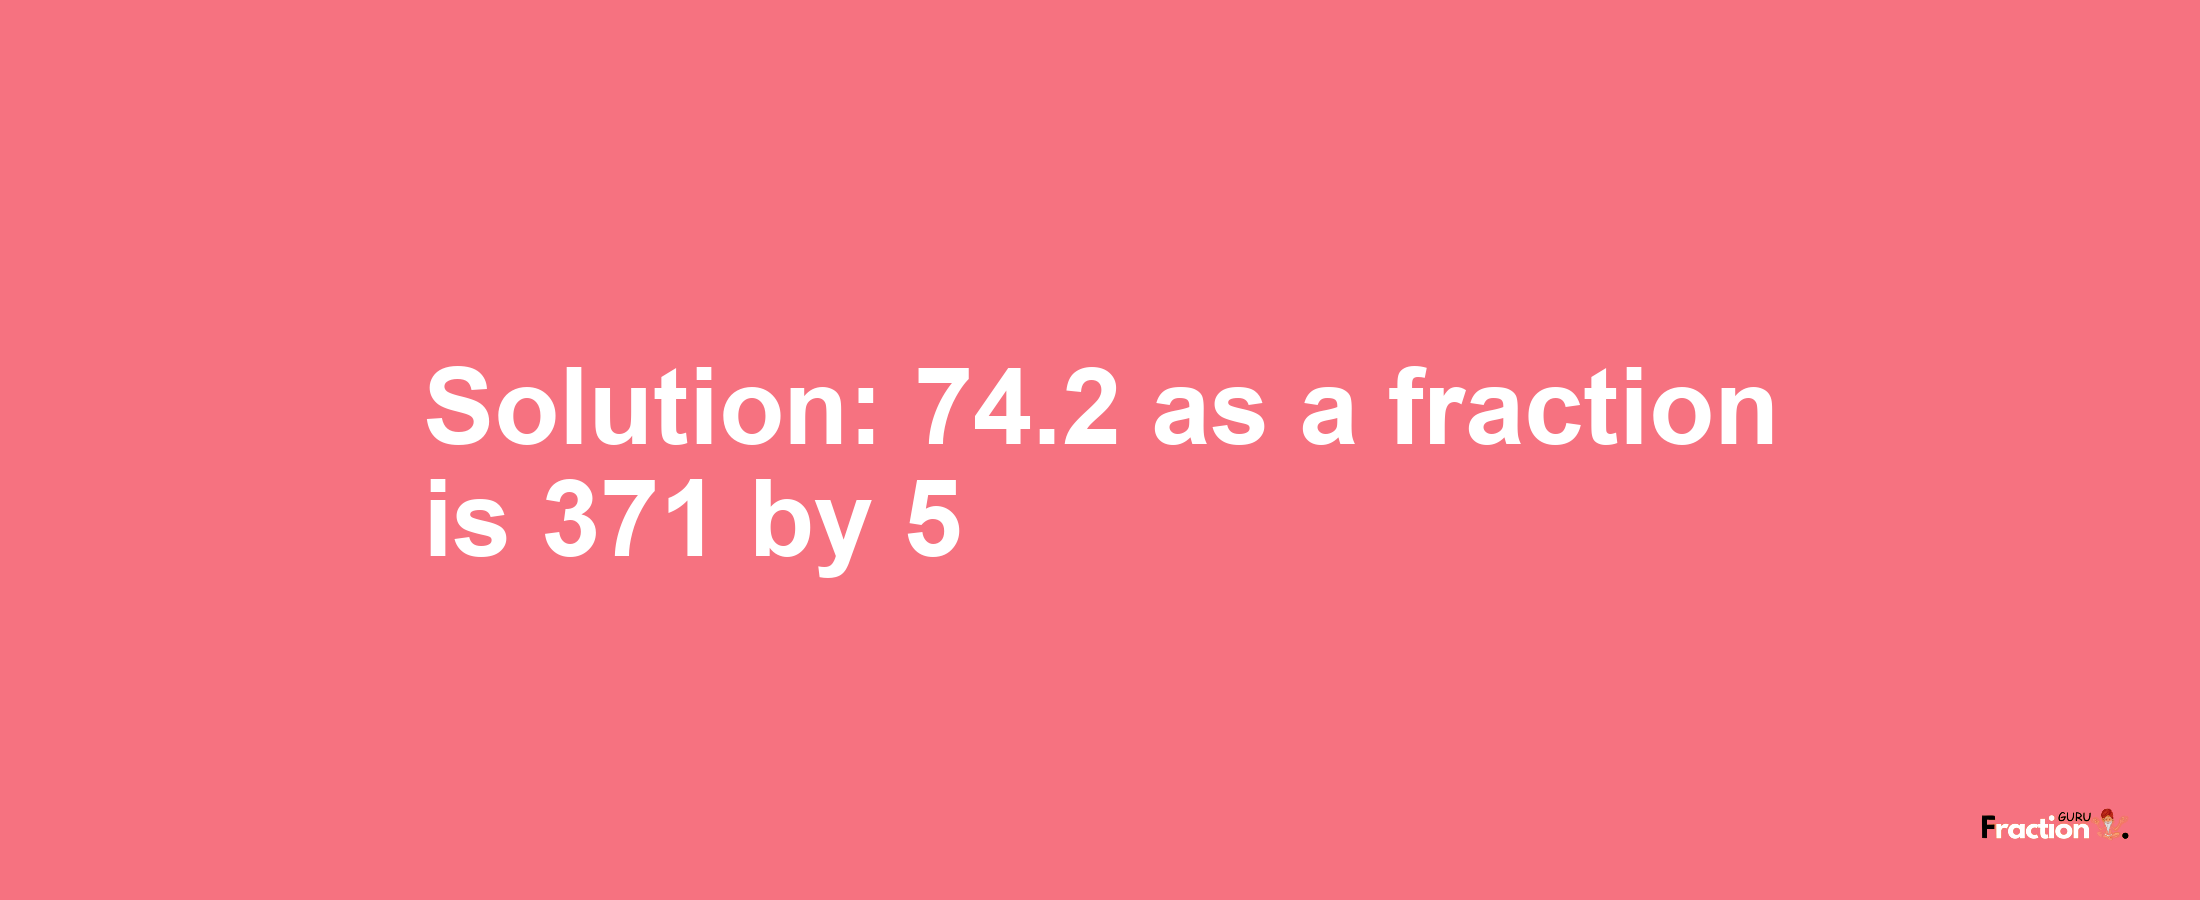 Solution:74.2 as a fraction is 371/5